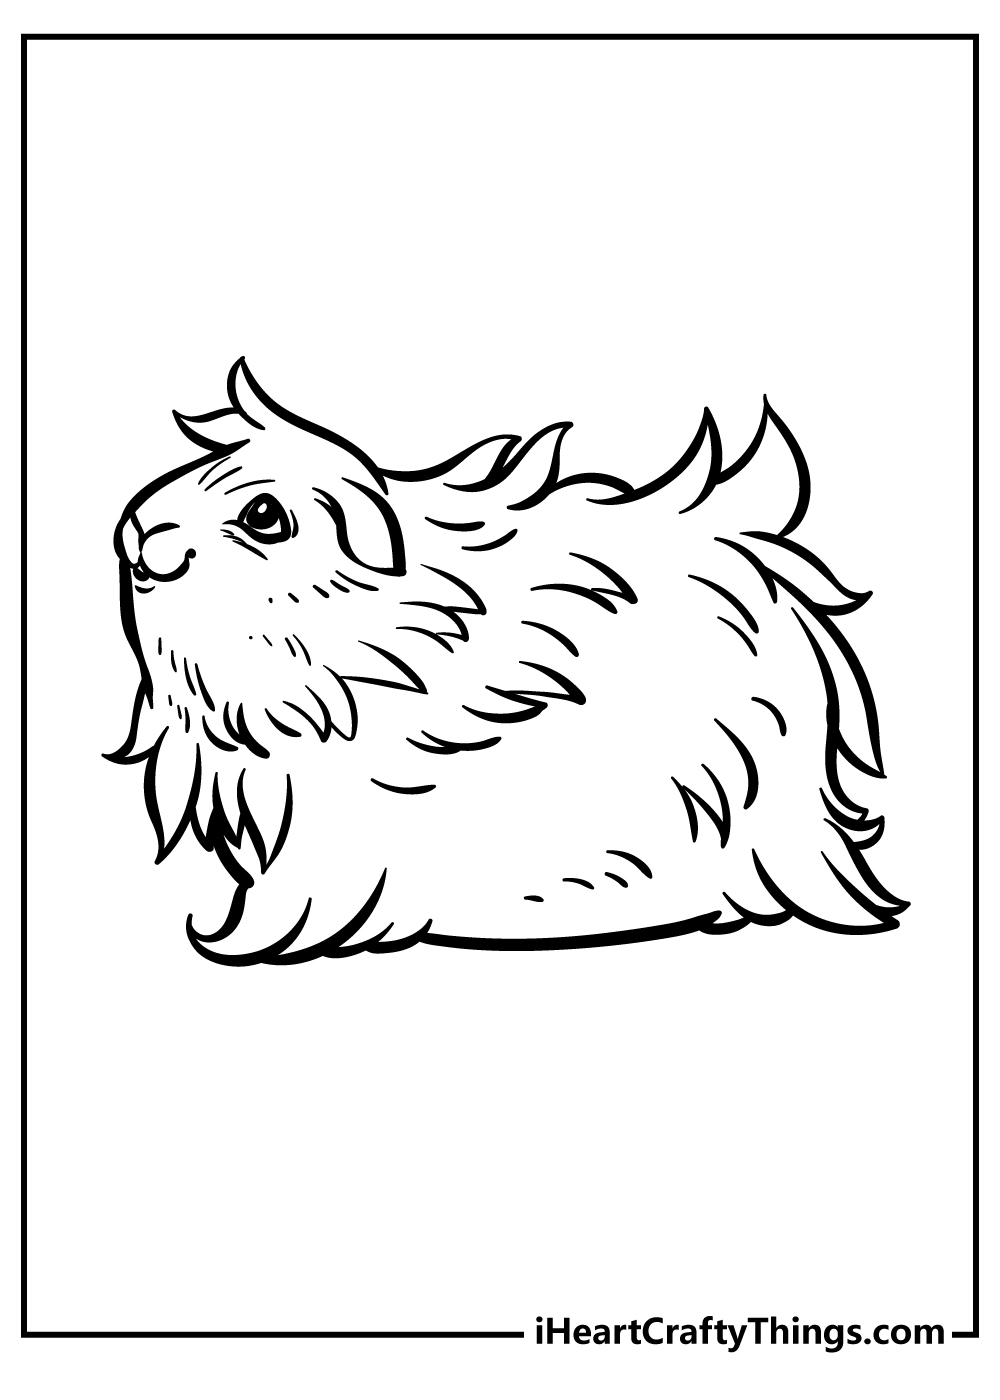 Guinea Pig Coloring Pages for adults free printable